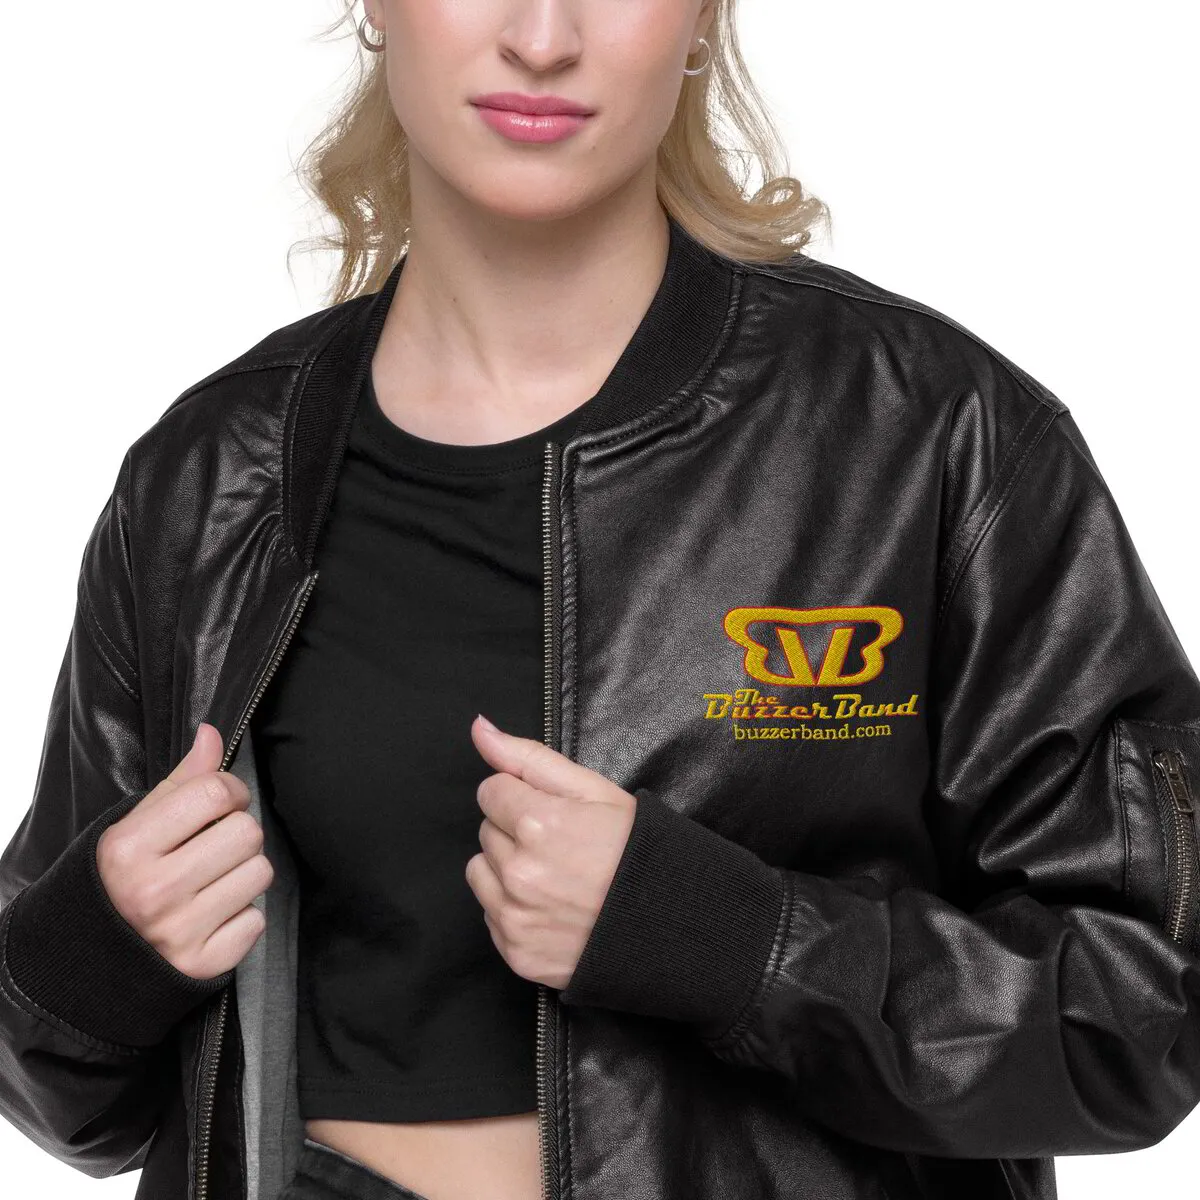 Unisex Faux Leather Bomber/Tour Jacket - Embroidered Golden Buzzer